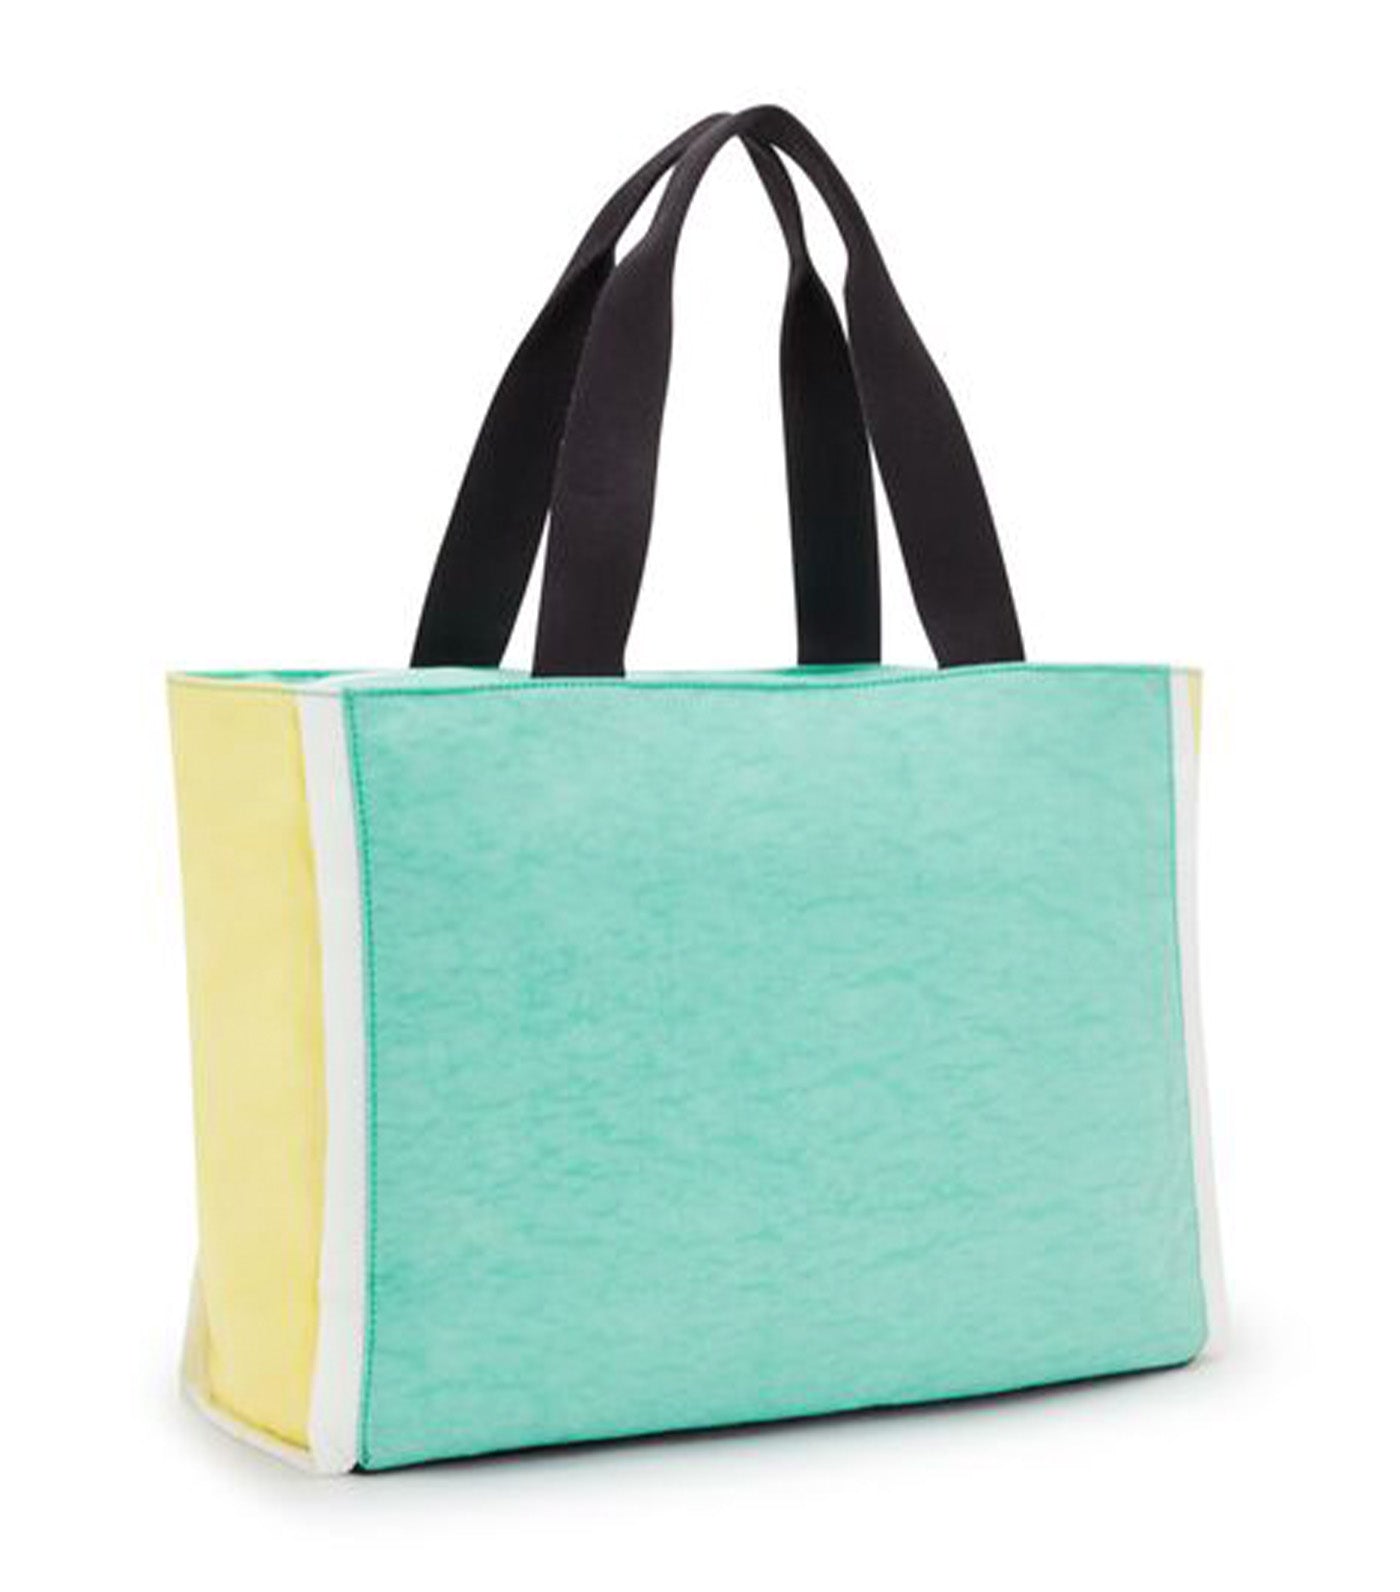 Nalo Tote Bag Lively Teal